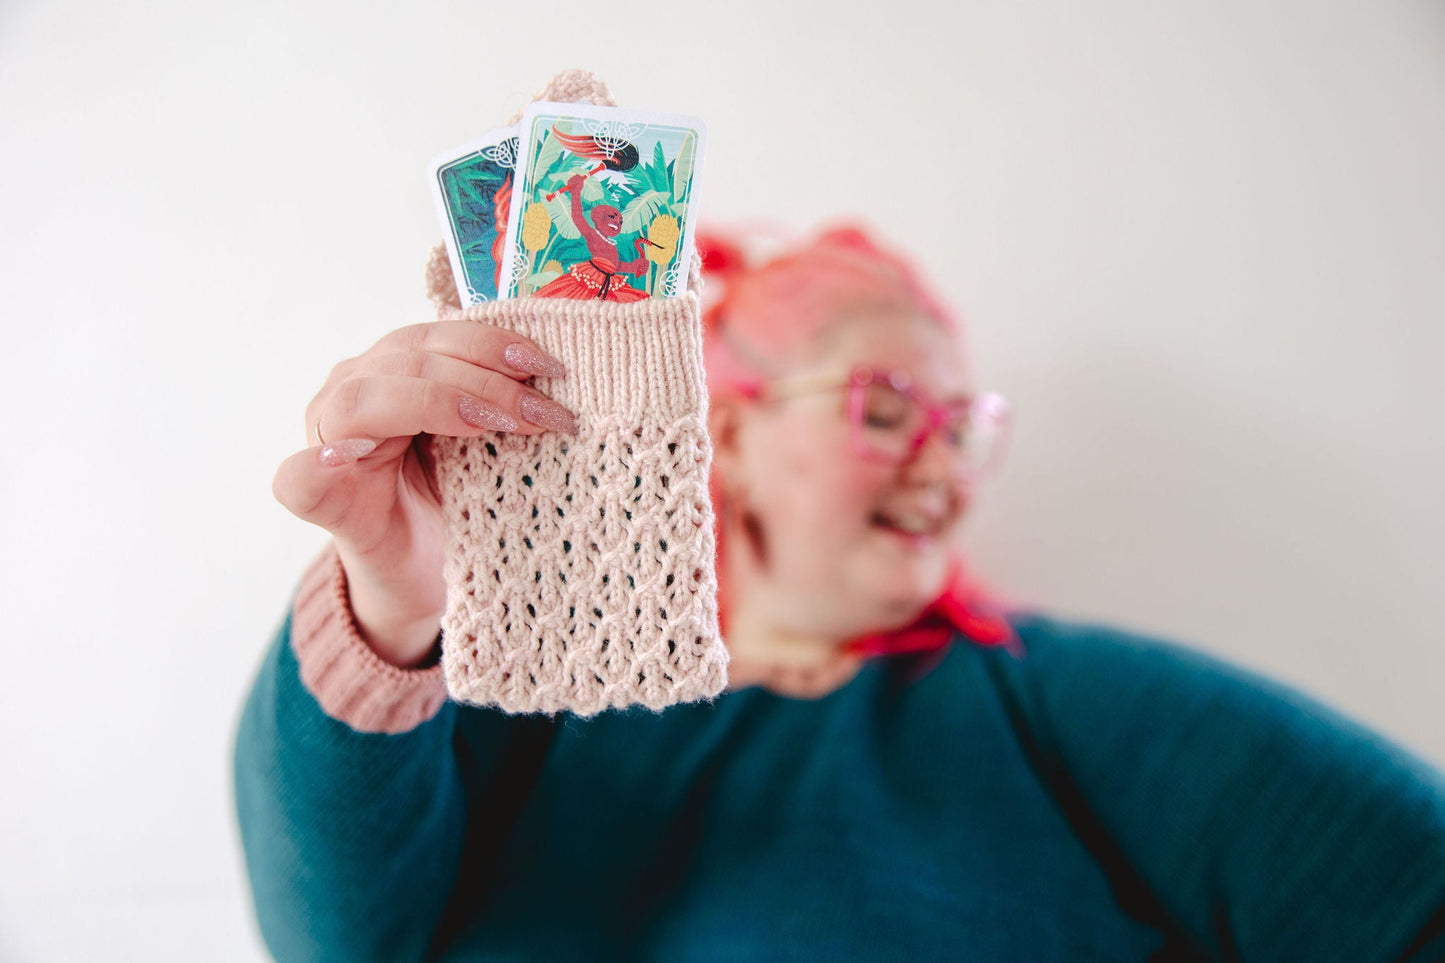 Courtney, who has pink hair, holds a cream colored lace knit pouch, the Mary Tarot Pouch. The pouch holds two brightly colored tarot cards.